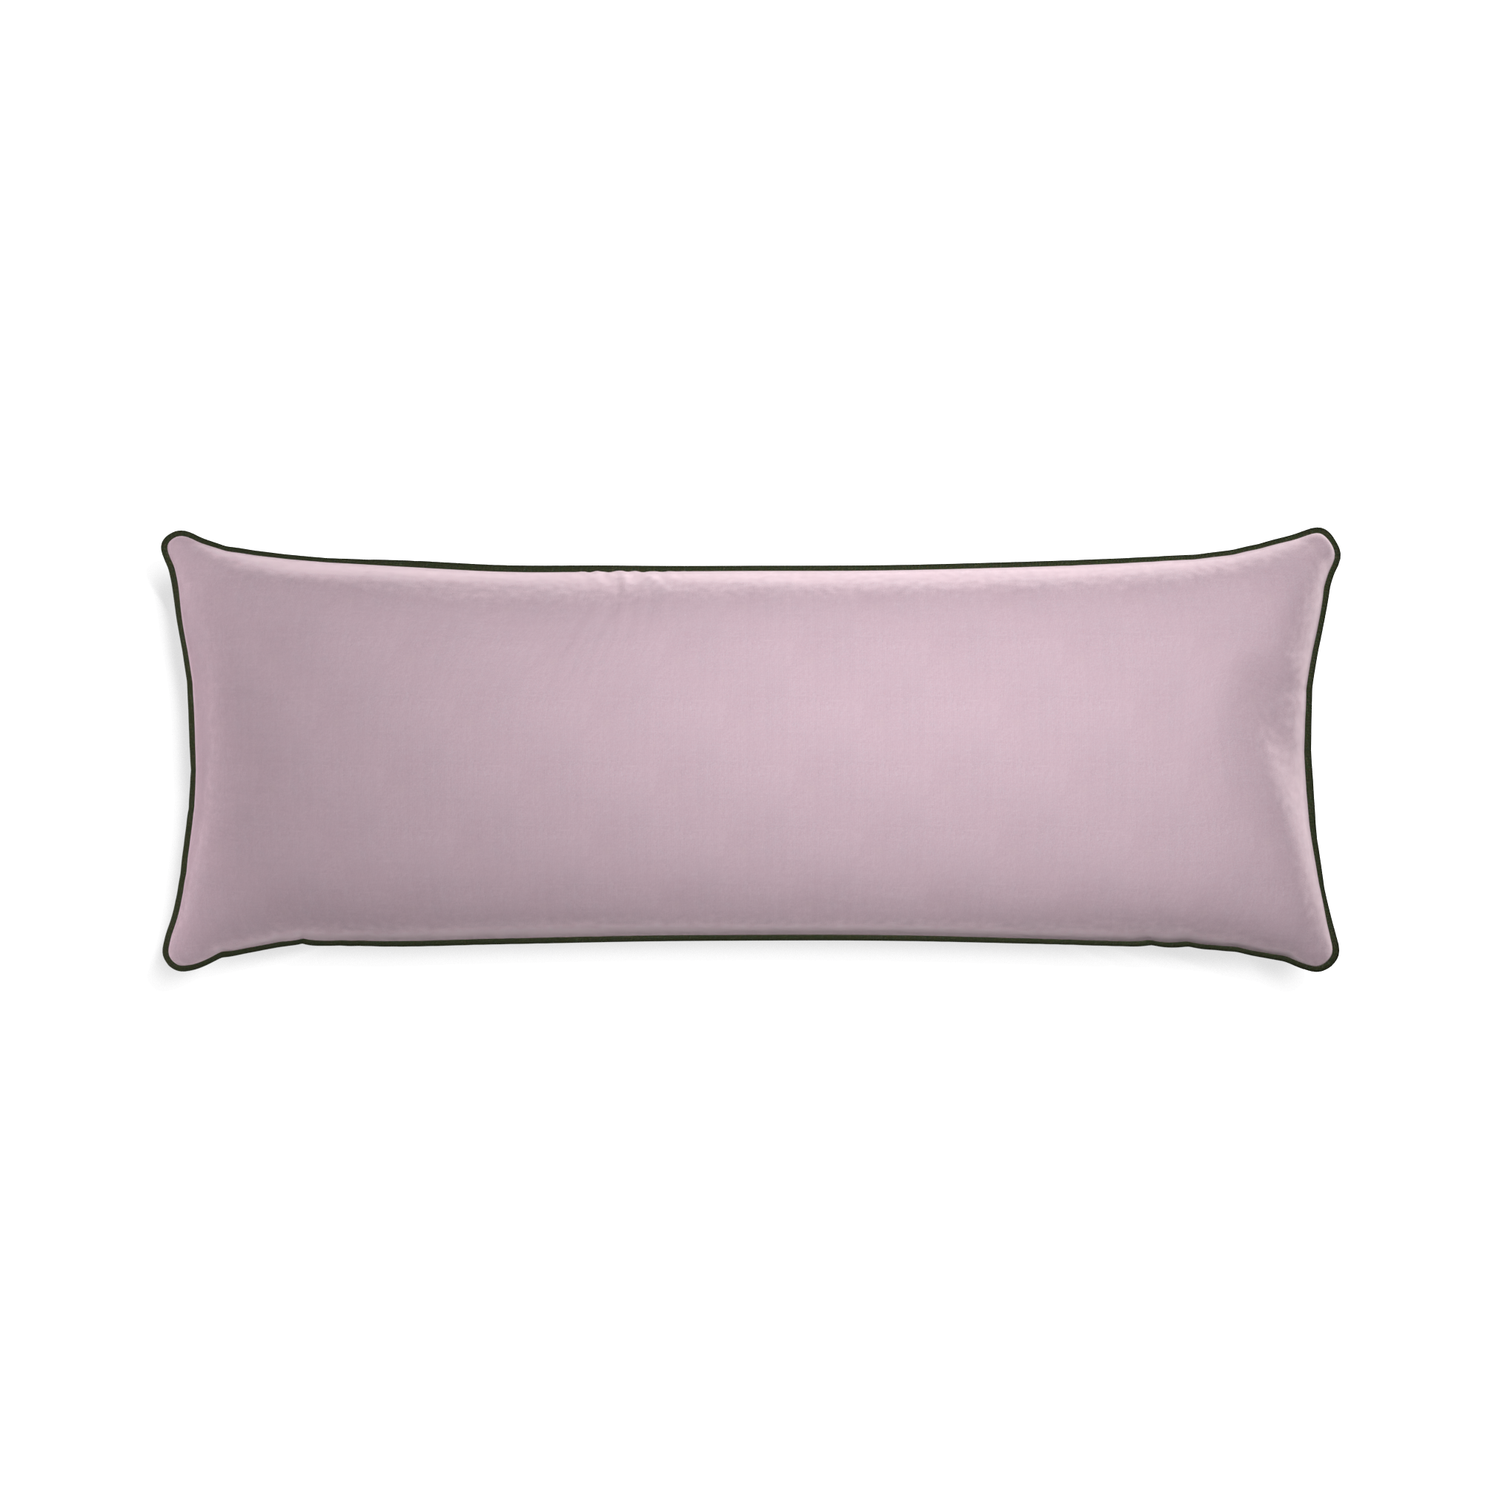 Xl-lumbar lilac velvet custom pillow with f piping on white background